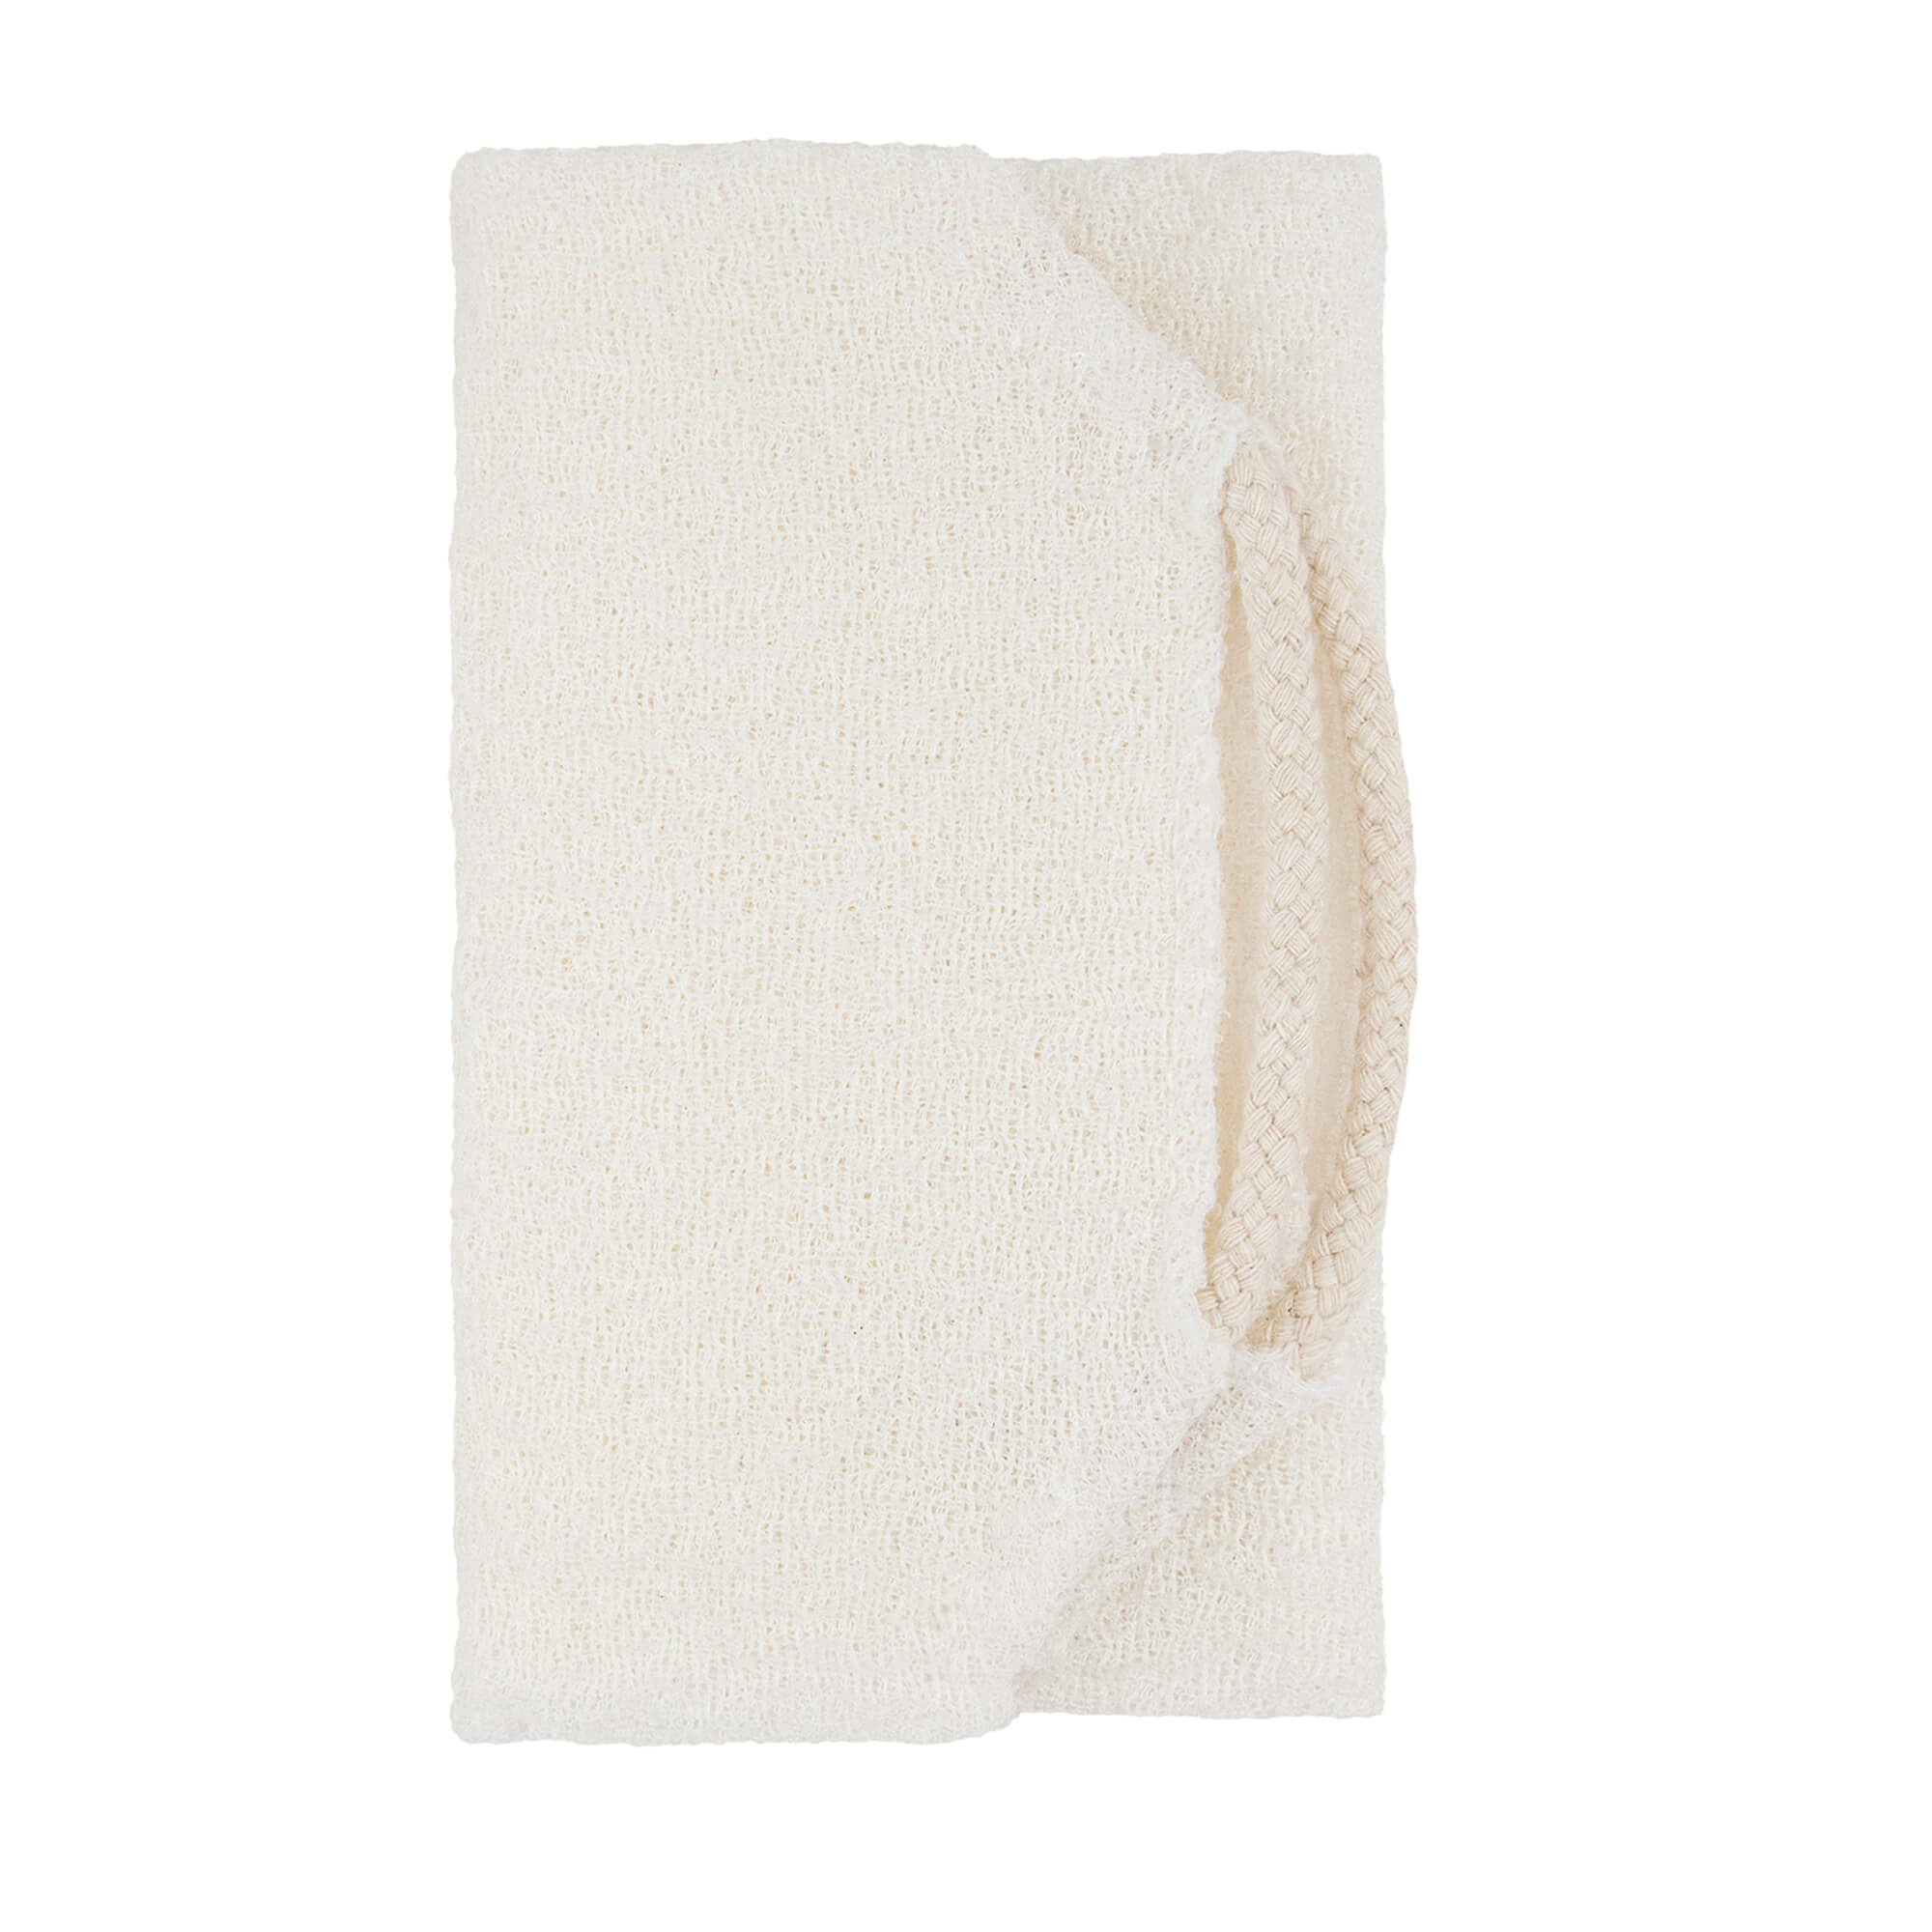 Daily Stretch Wash Cloth by Daily Concepts luxury Spa goods – DAILY CONCEPTS